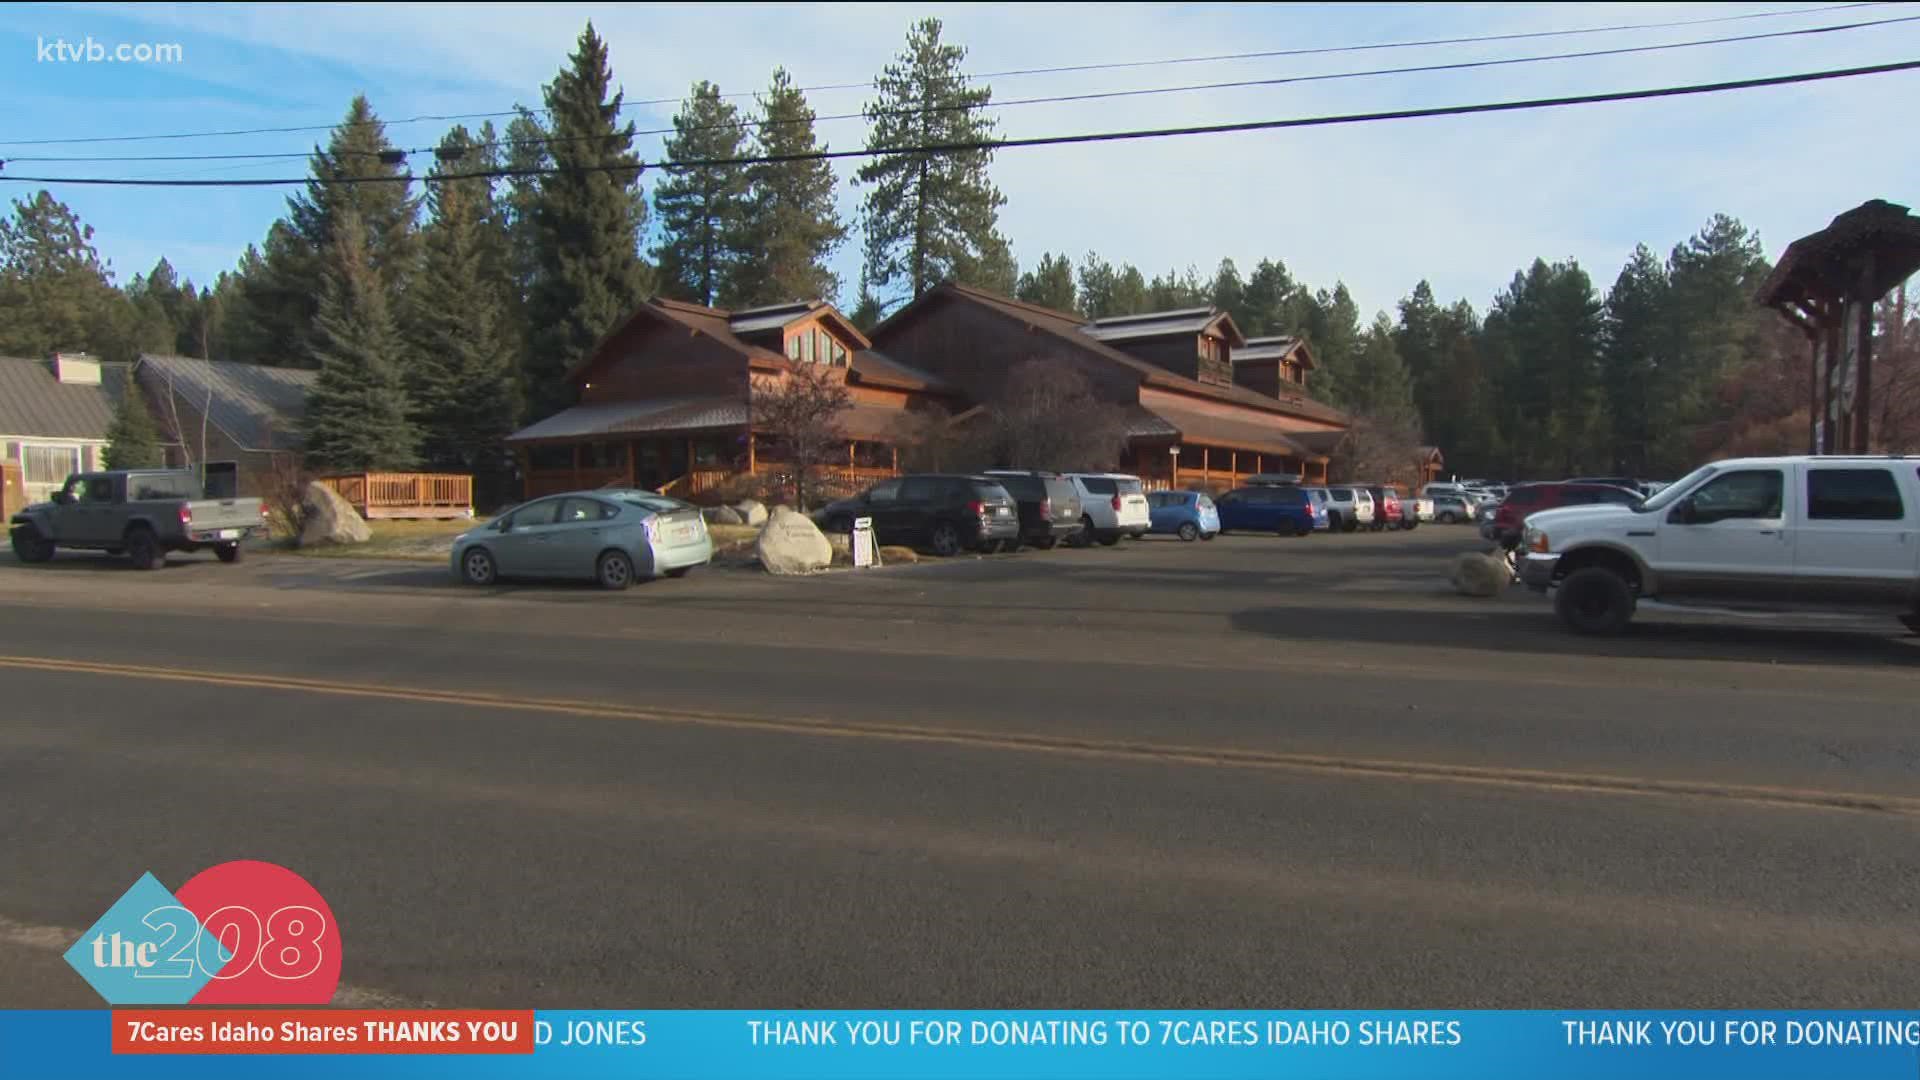 Sunday was the last day The Pancake House in McCall will be open.